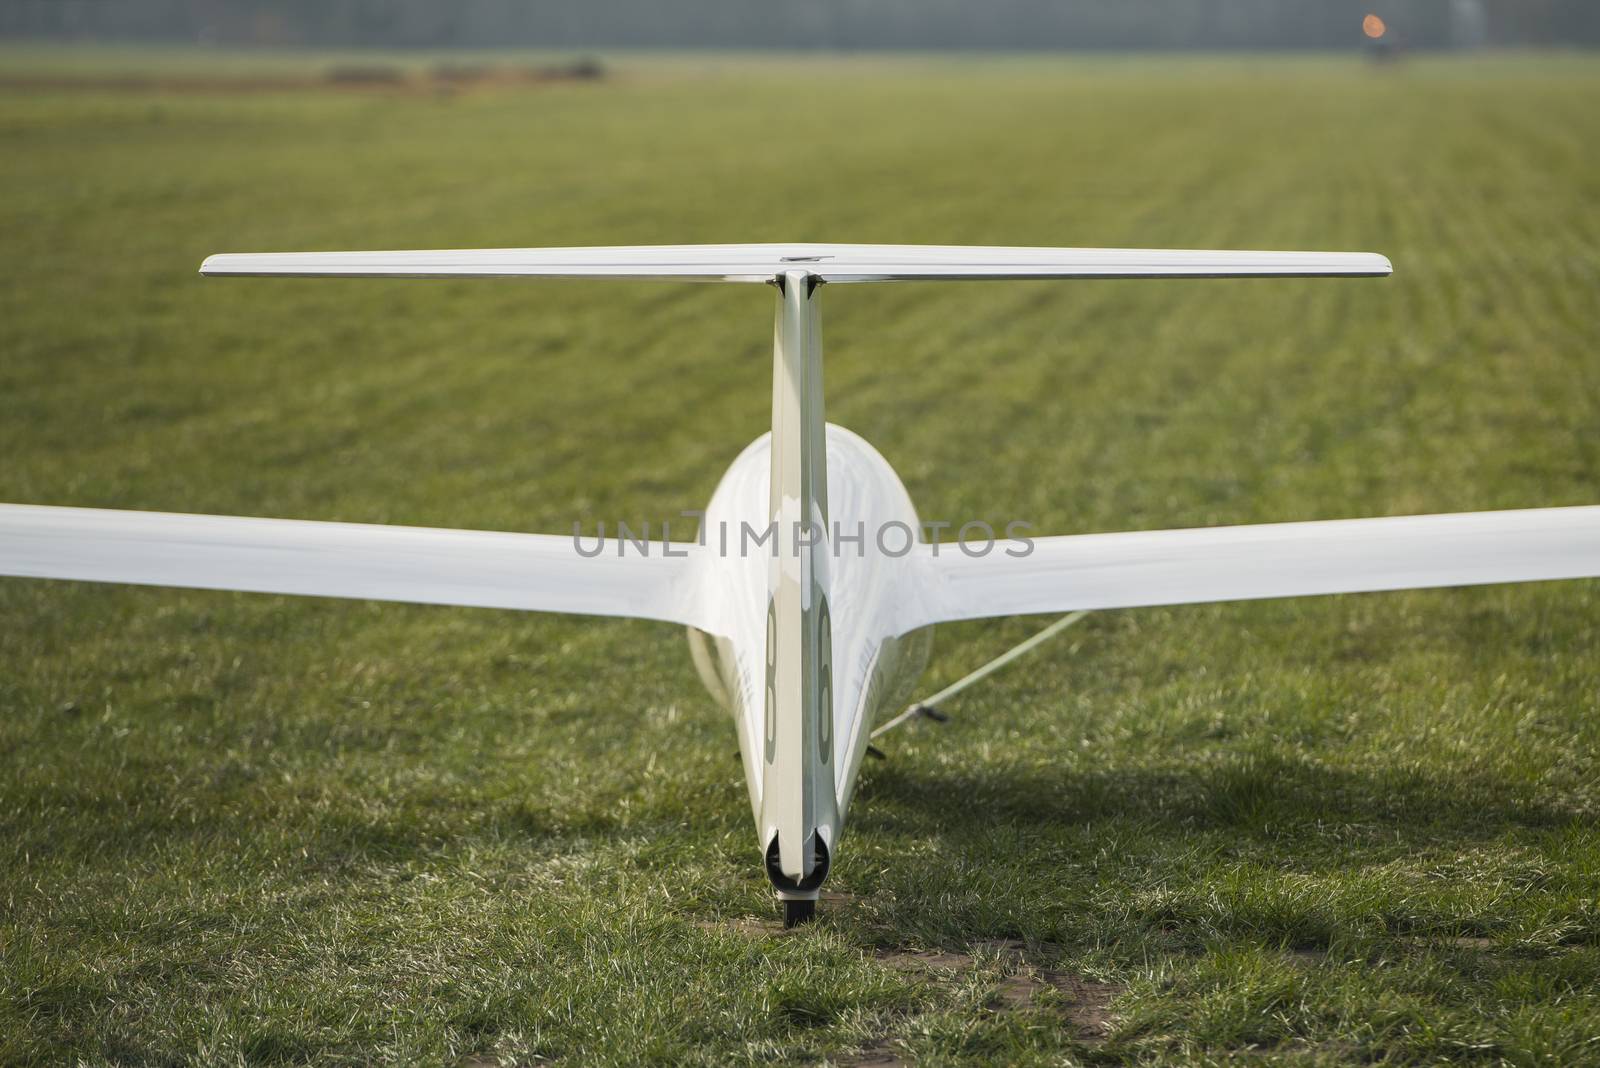 Pull up a glider by Tofotografie